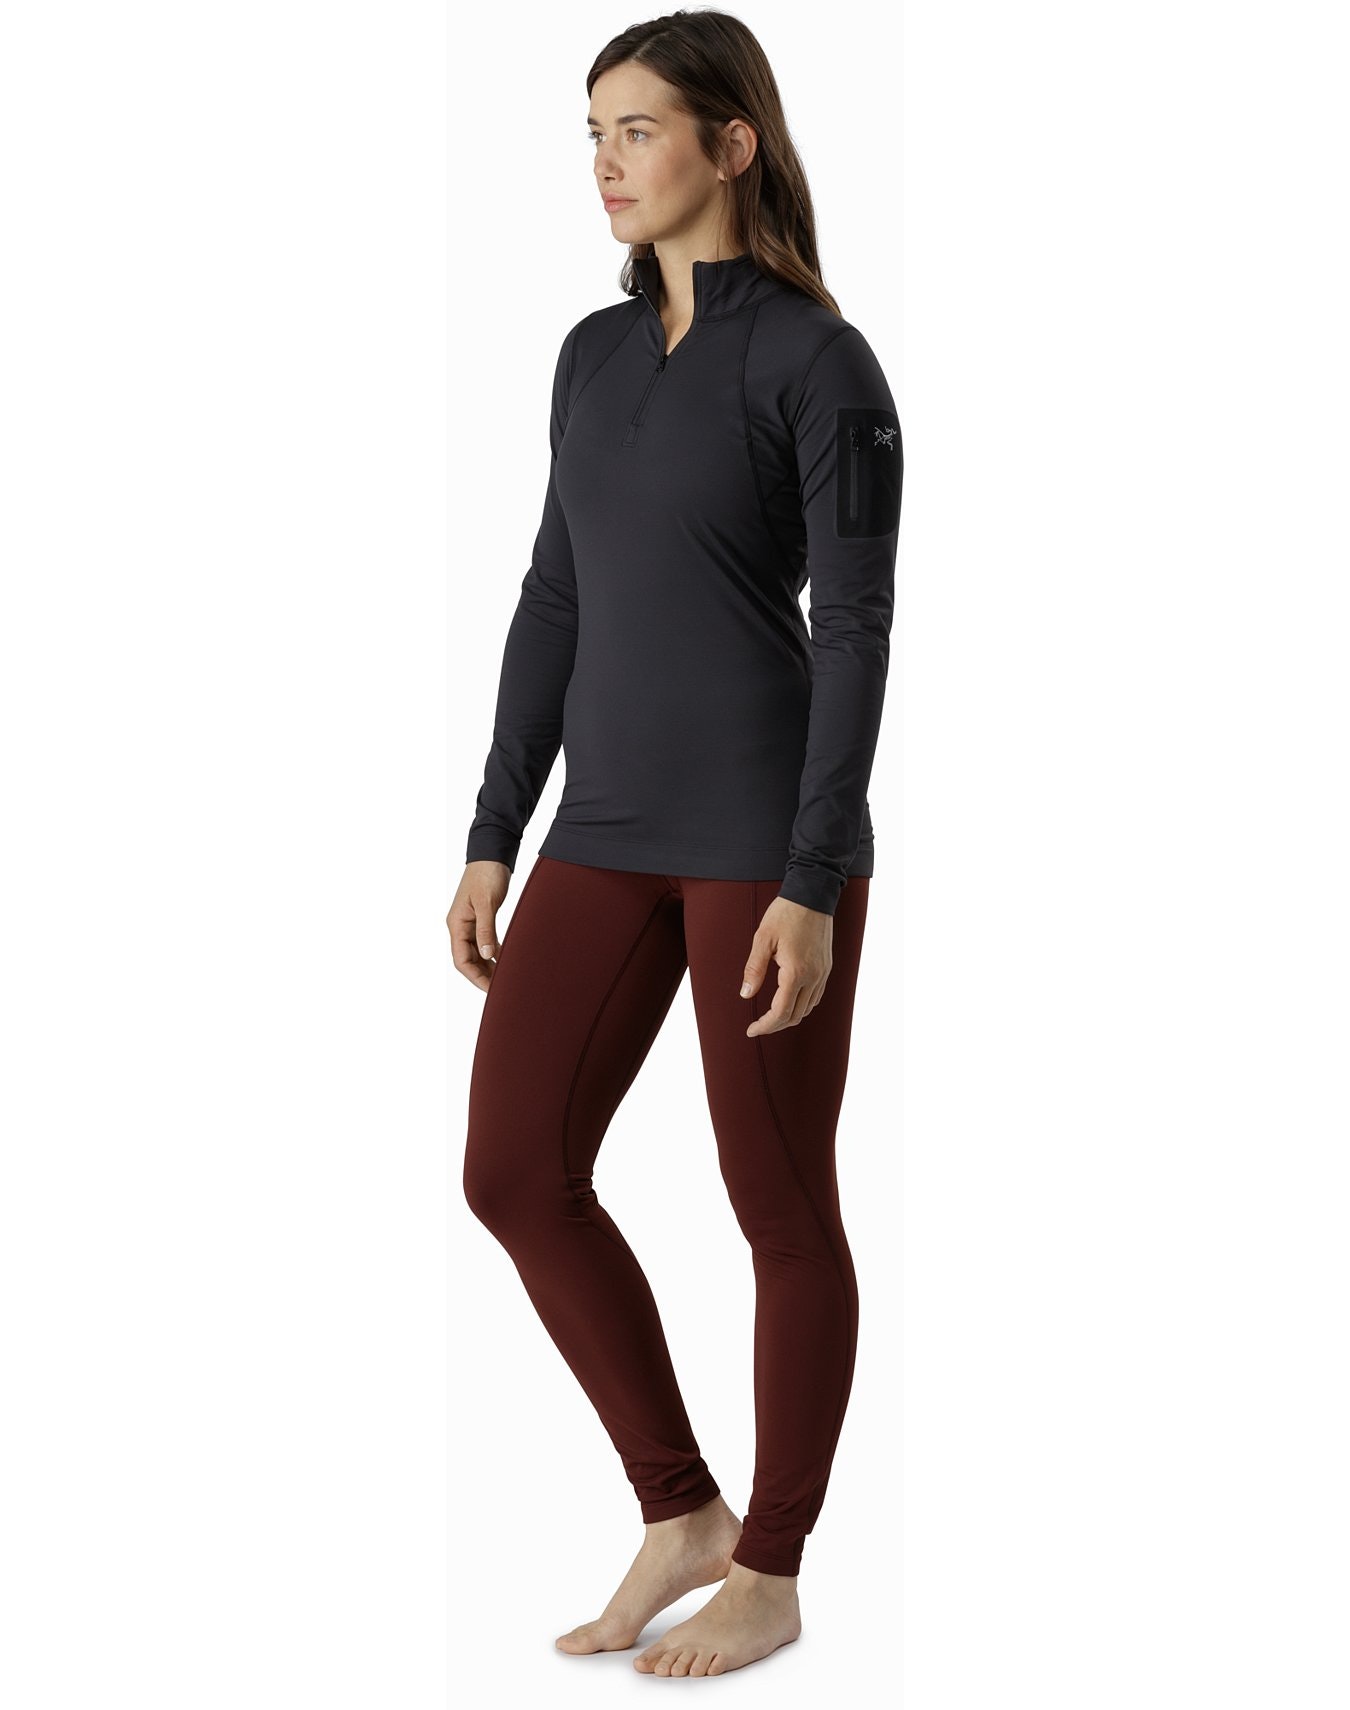 The Rho LT Bottom for Women. Gear Review: Arc’teryx’s base layers for the season. 